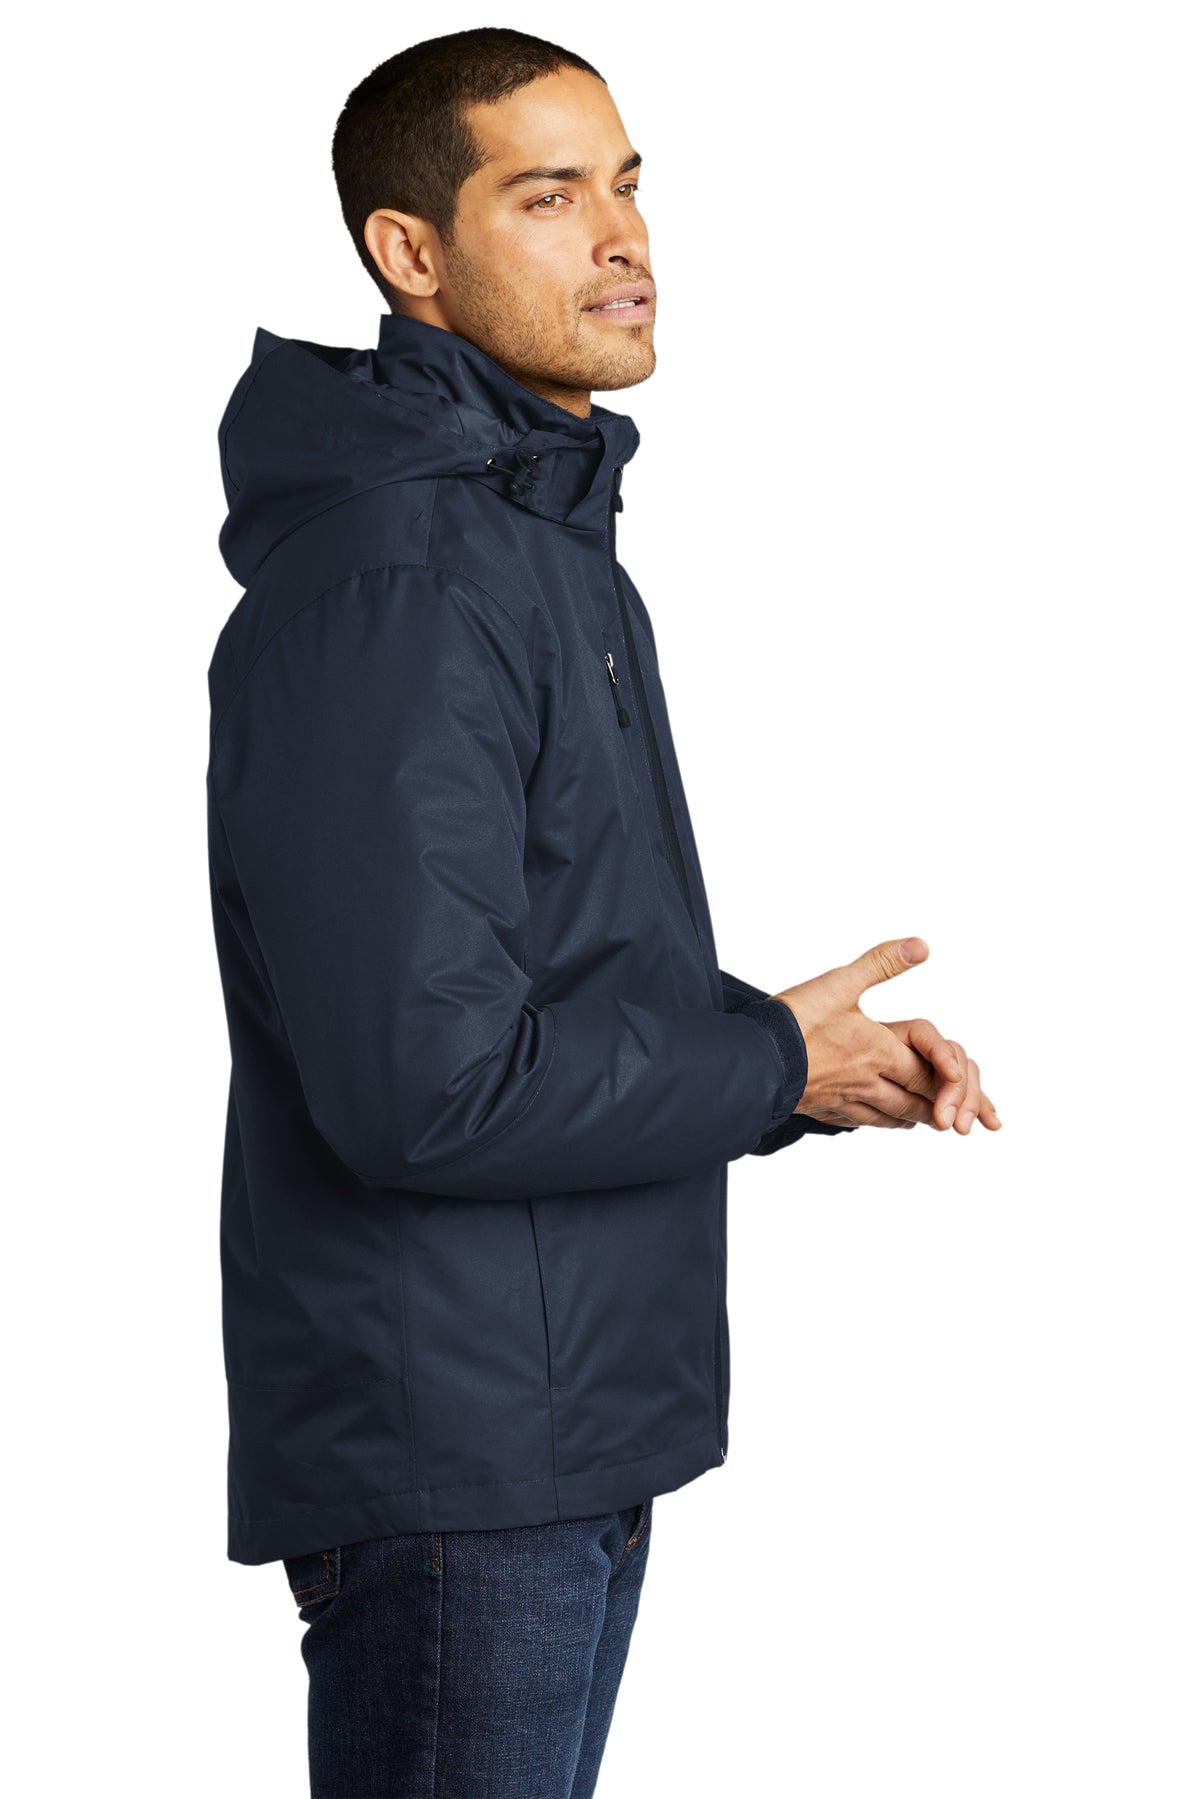 Port Authority Vortex Customized Waterproof 3-in-1 Jackets, River Blue Navy/ River Blue Navy